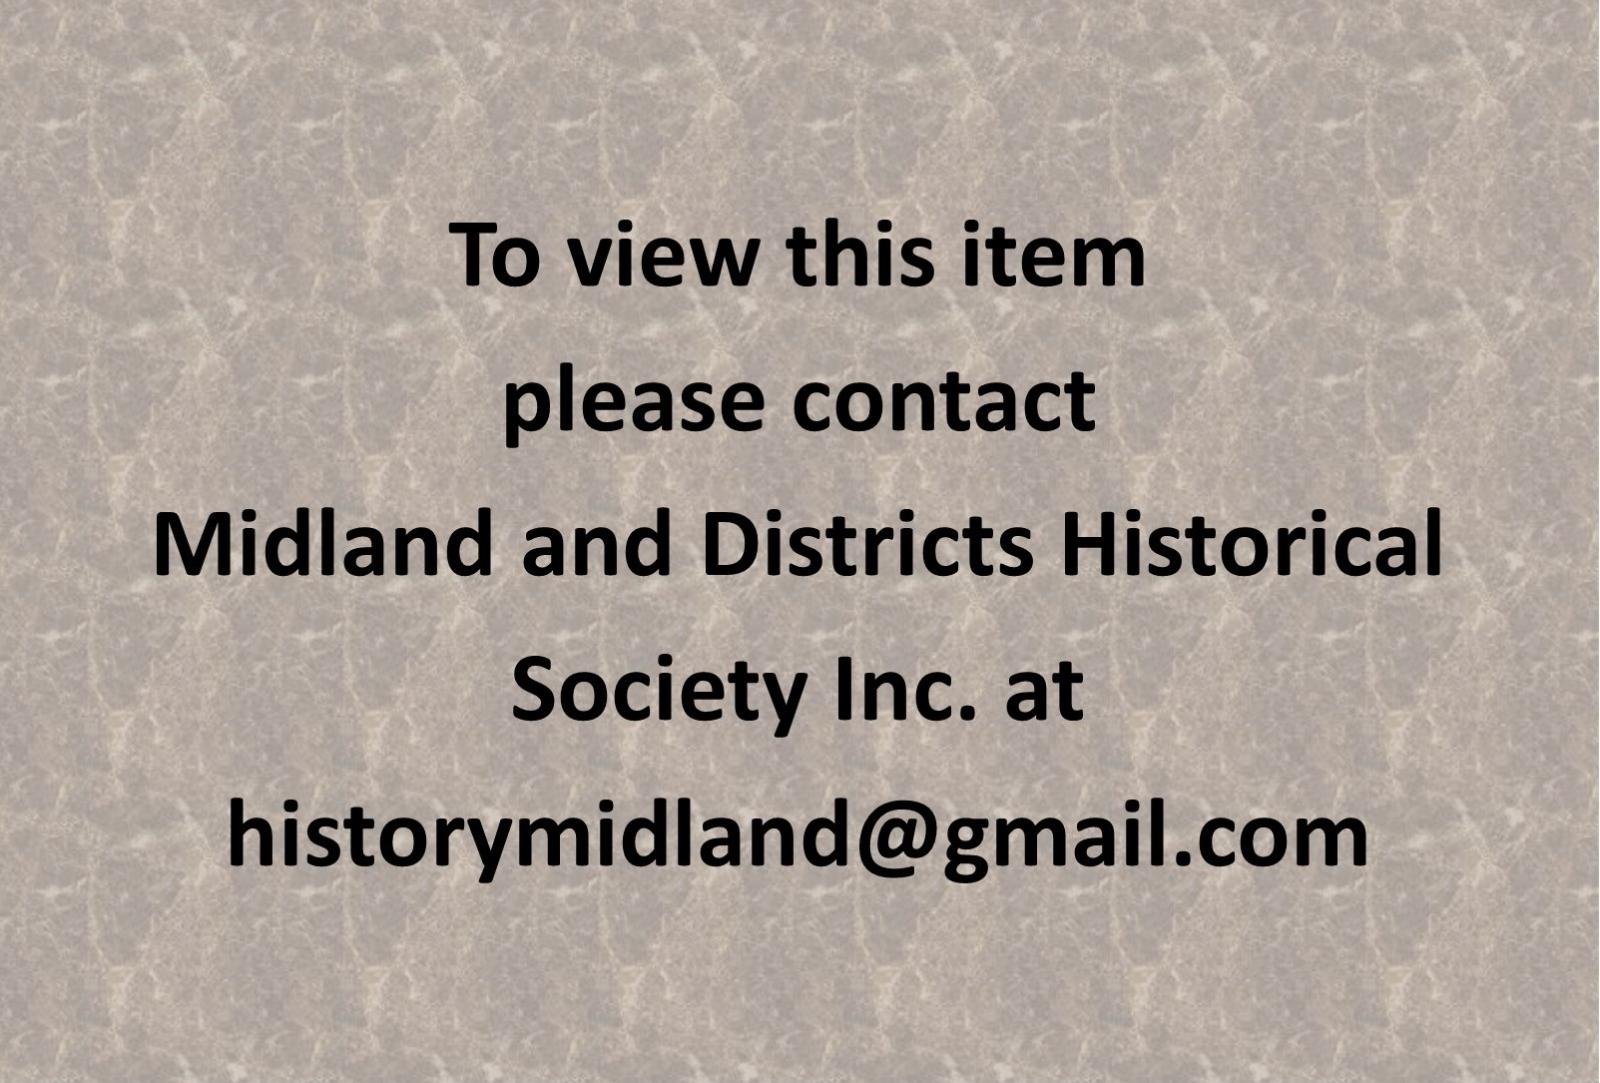 To view this item please contact Midland and Districts Historical Society Inc. at historymidland@gmail.com.